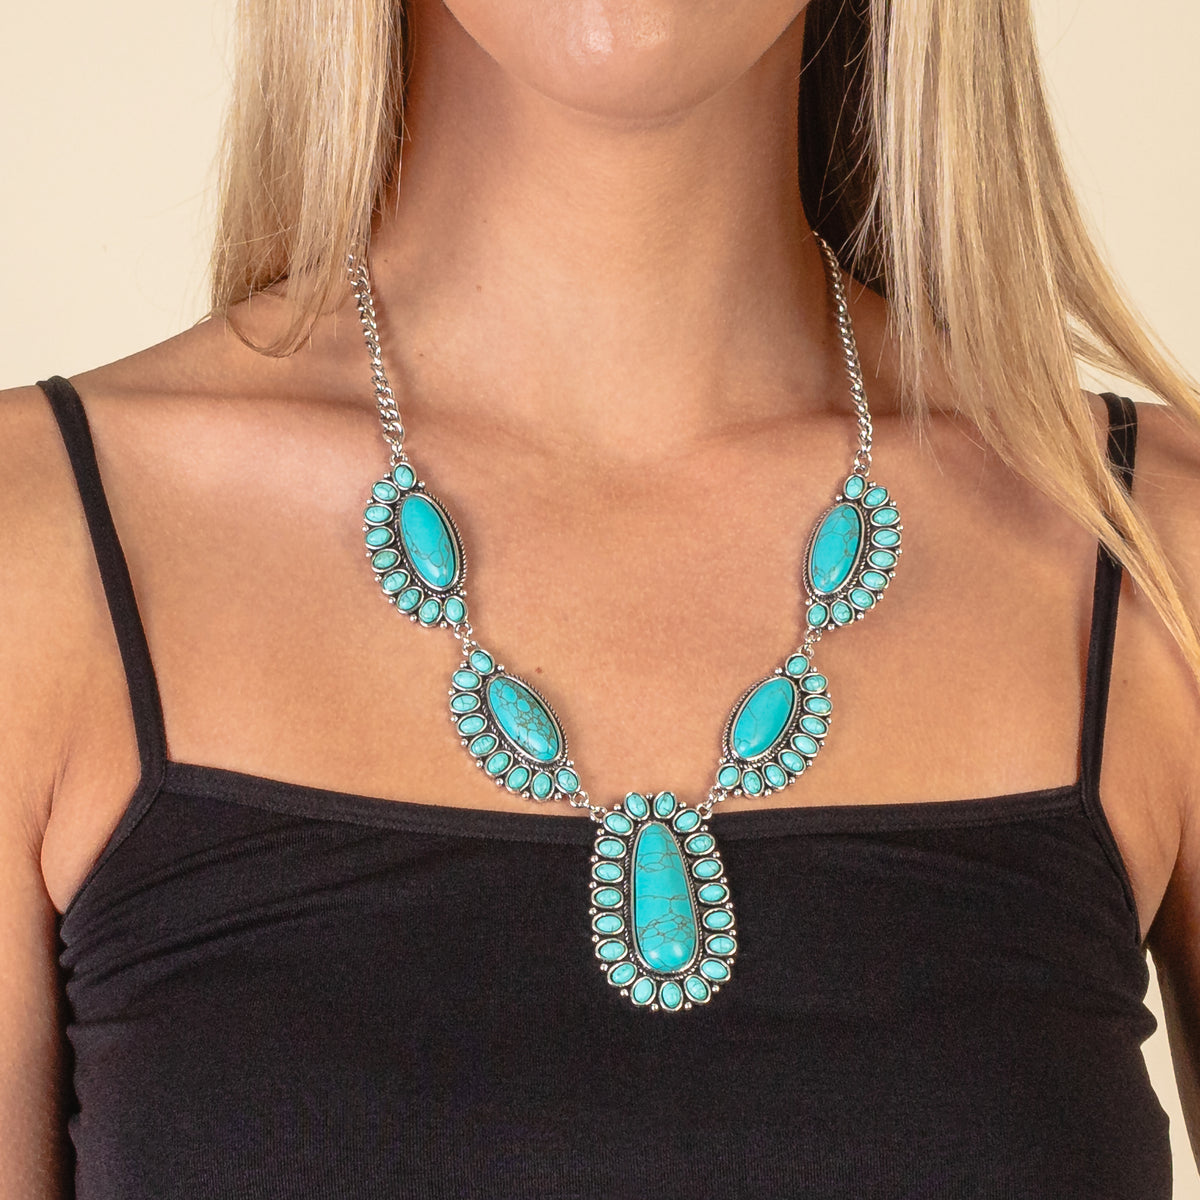 92006 - Squash Blossom Necklace - Turquoise & Silver